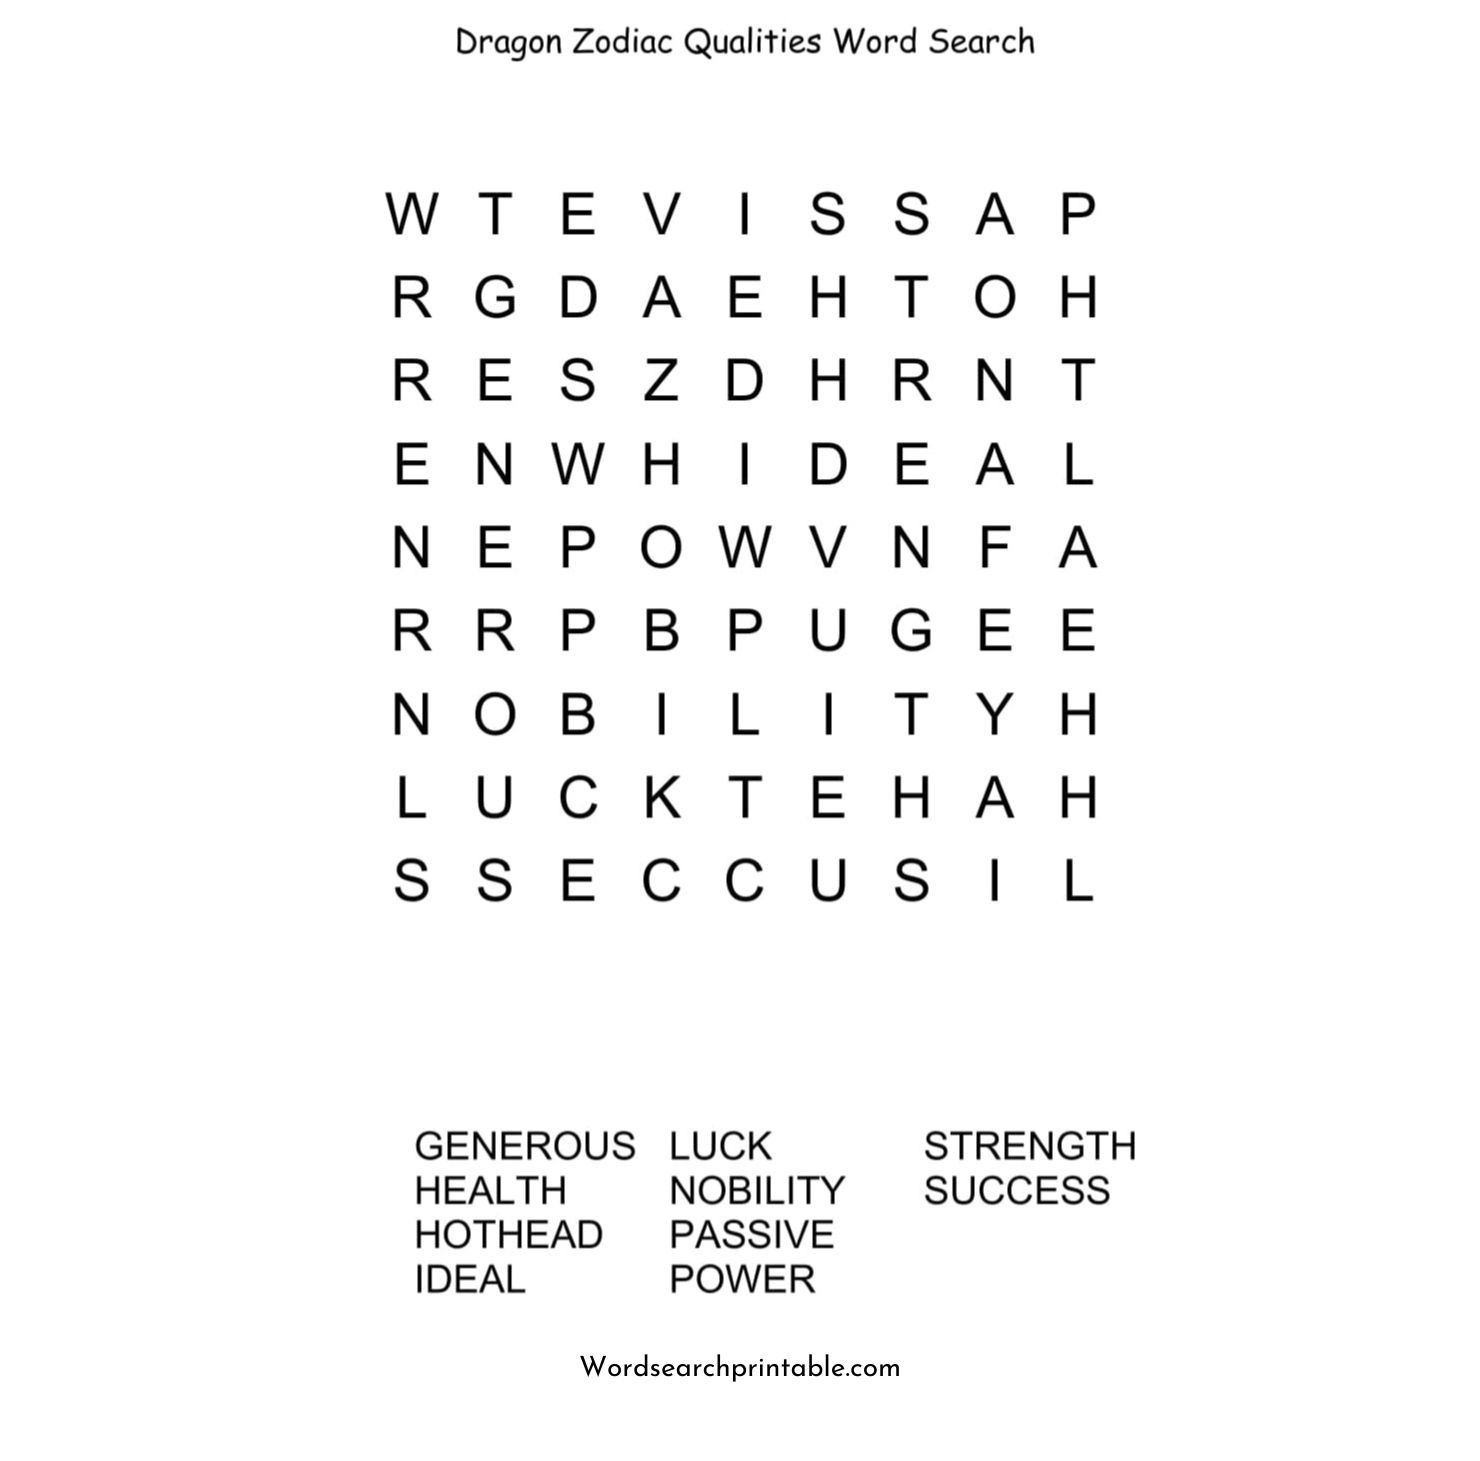 dragon zodiac qualities word search puzzle